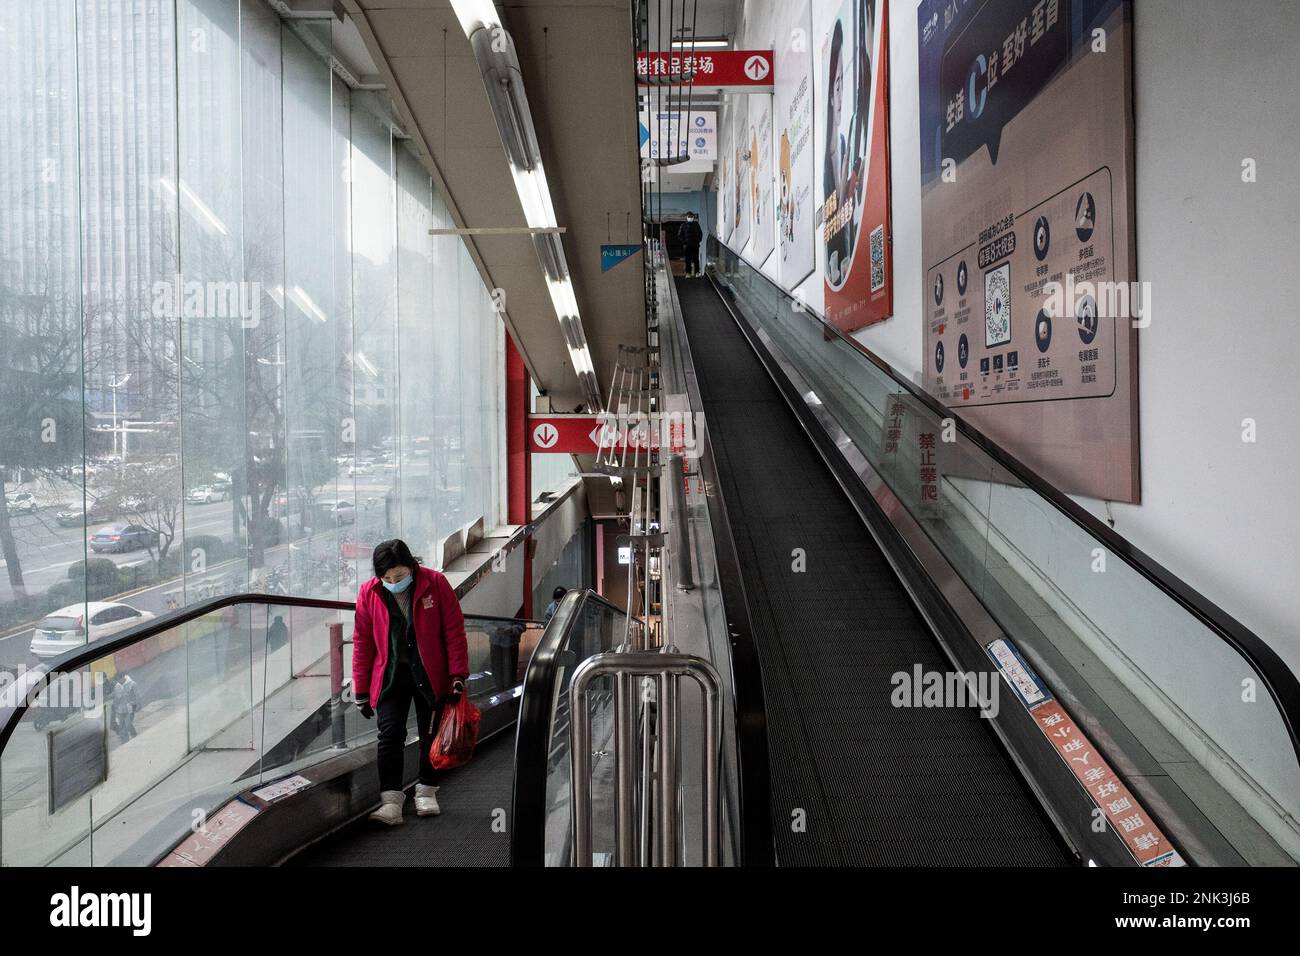 A customer takes an escalator to a Carrefour store in Wuhan. Carrefour entered the Chinese market in the year 1995 and expanded very quickly, securing a large market share. However earnings began to get smaller as the competition kept on increasing. In the year 2019, the French retailer sold around 80% of its 'loss-making' China business to Jiangsu-based 'Suning' for CNY 4.8 billion which was equal to USD 699 million at the time).This month, reports of shortages at the many local Carrefour store have caught the attention of customers. Several people started complaining that they have been unab Stock Photo